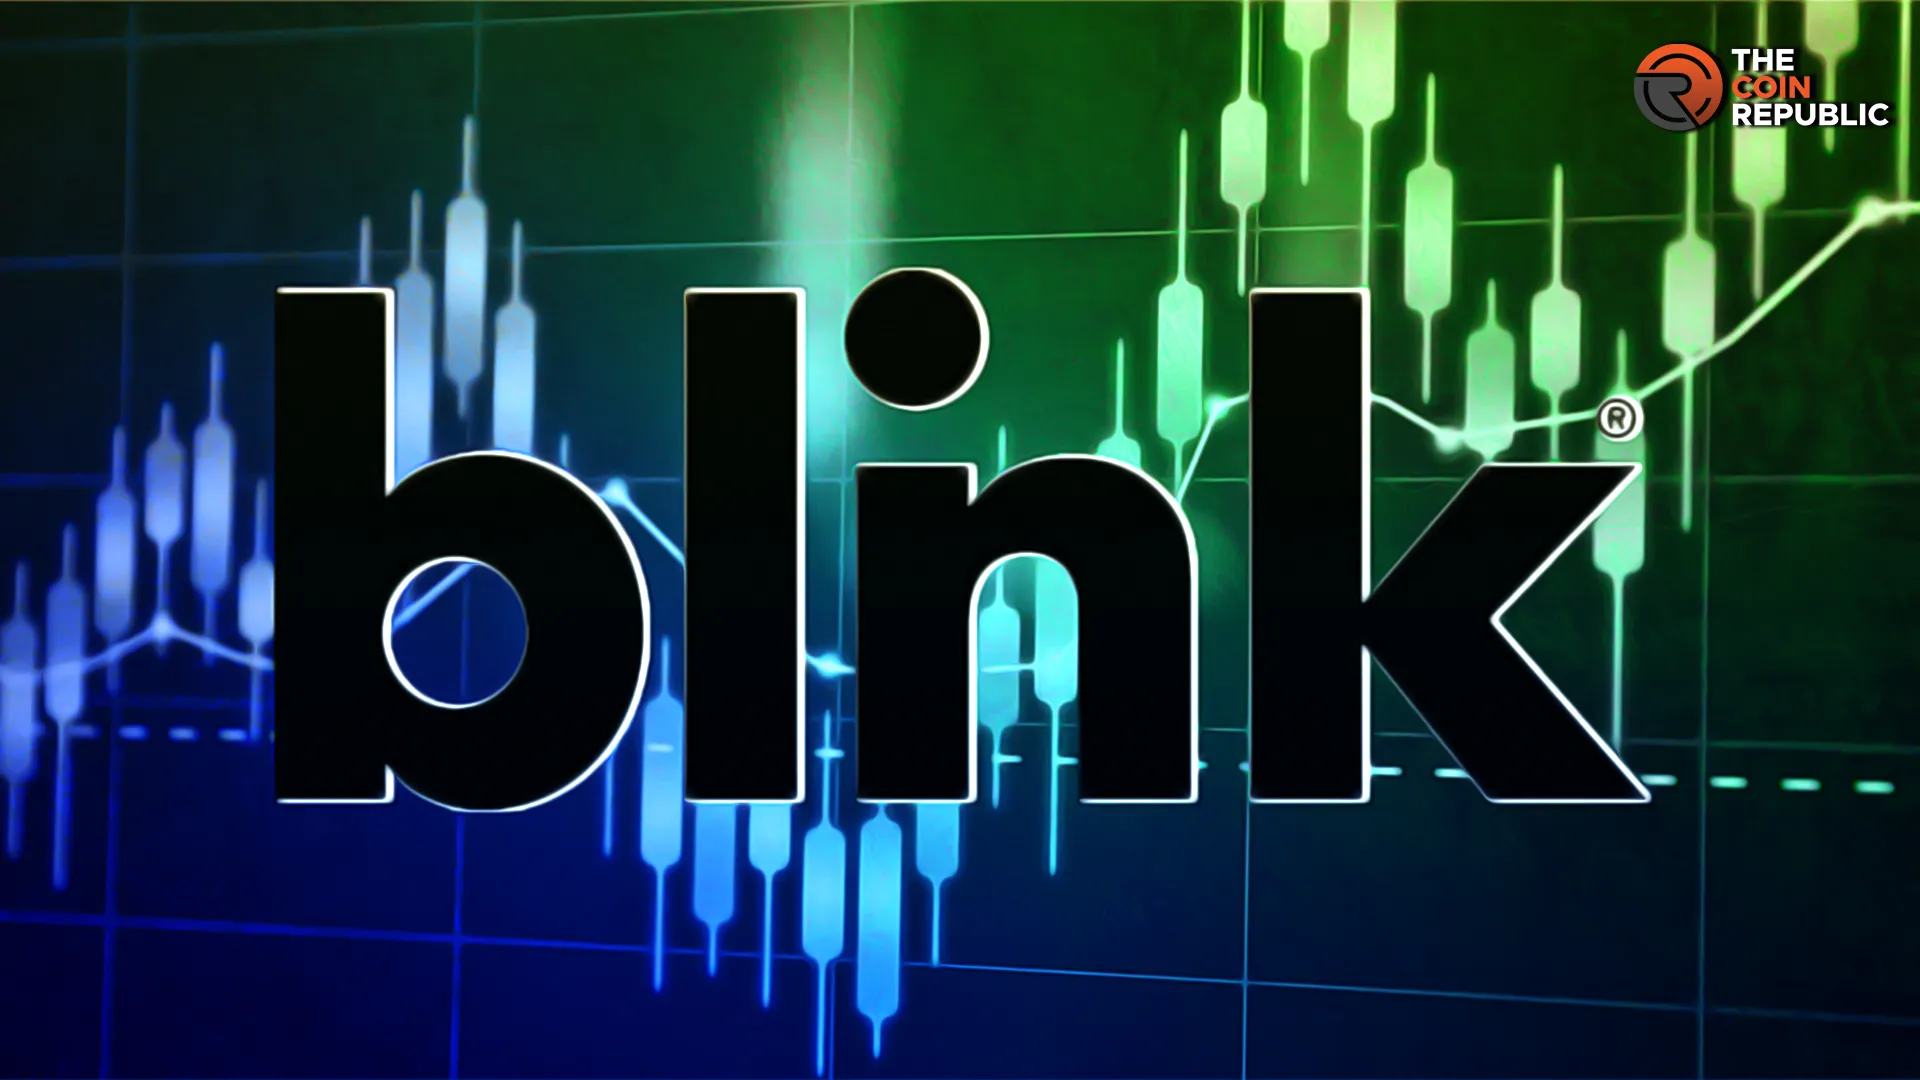 BLNK Stock Analysis: Beware of Short Squeeze After Q3 Earnings